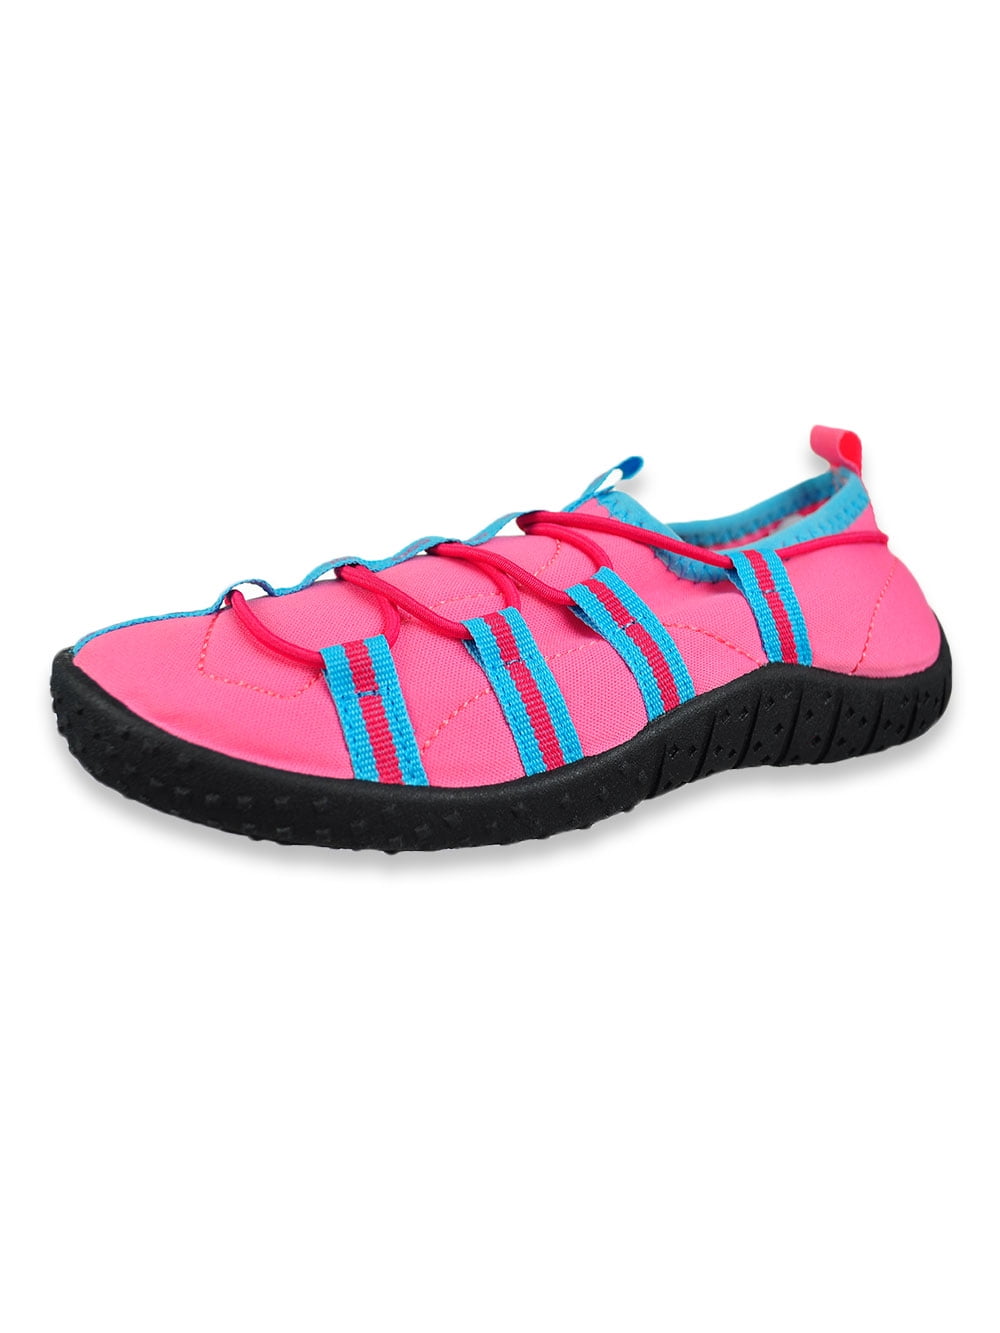 Girls and Unisex Summer Water Shoes for Little Kids and Toddlers Aquakiks Boys 